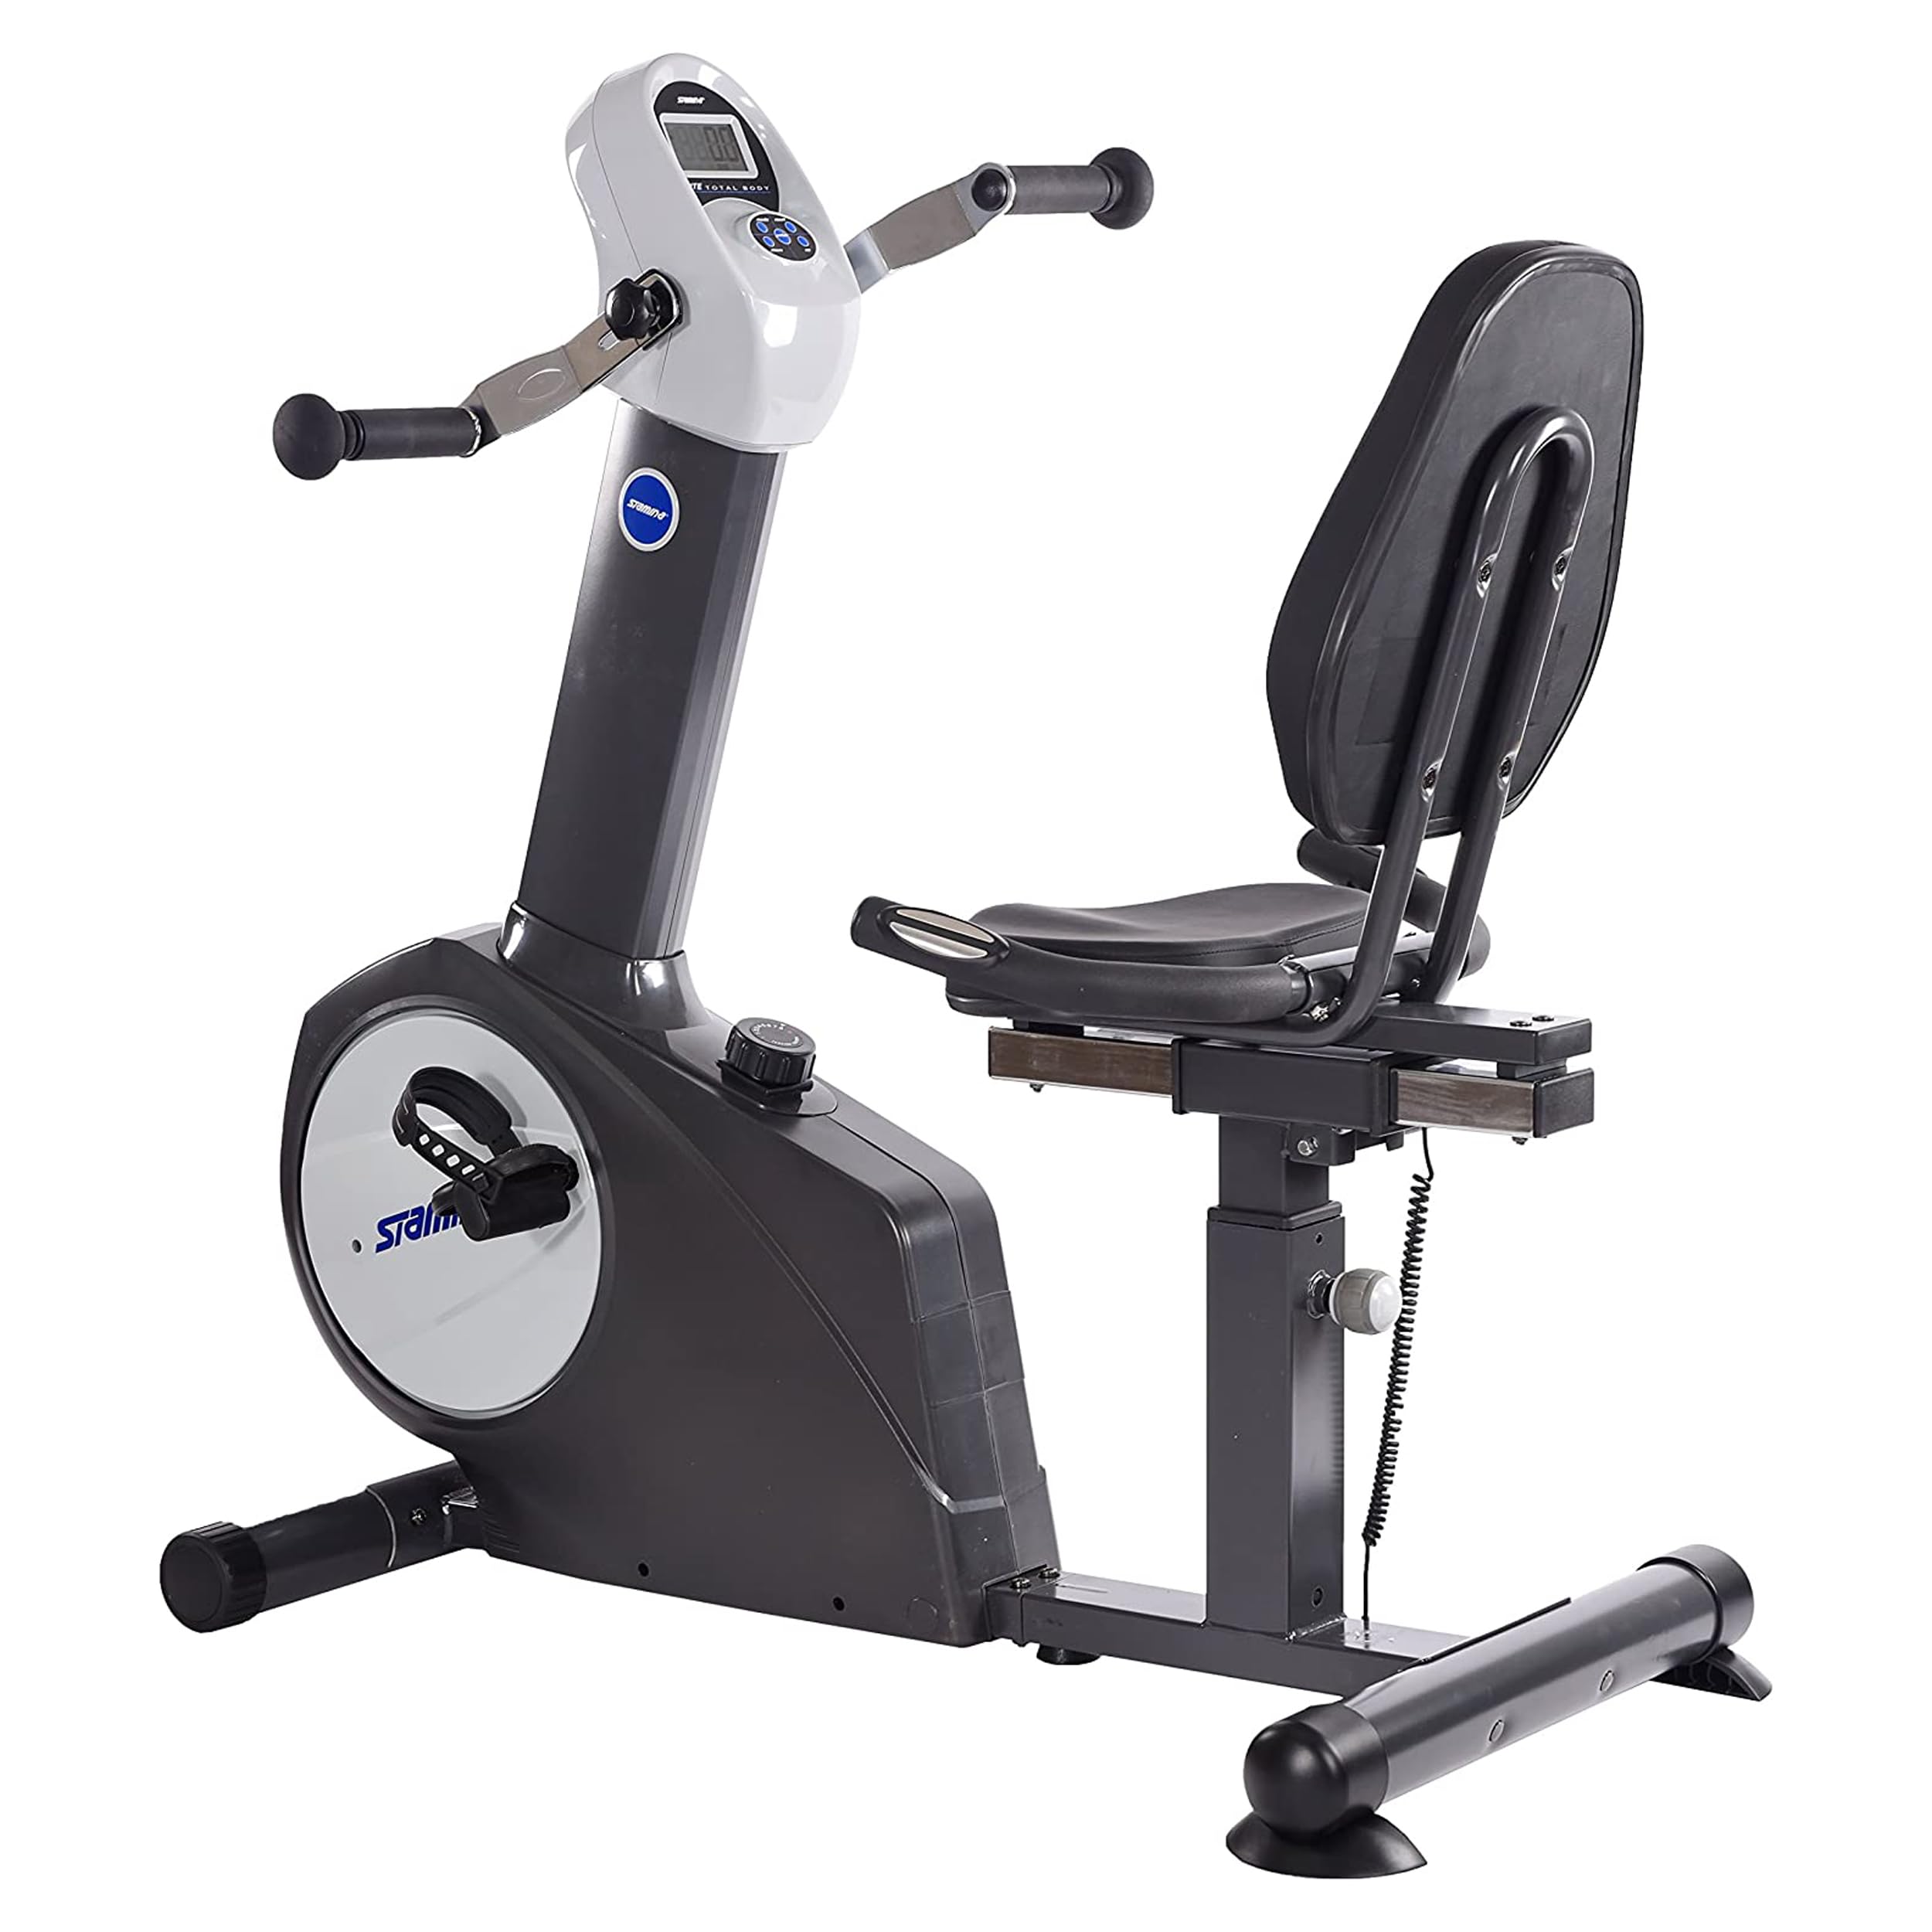 Stamina Elite Total Body Recumbent Bike with Arm Workout - Recumbent Cross Trainer with Smart Workout App for Home Workout - Up to 250 lbs Weight Capacity